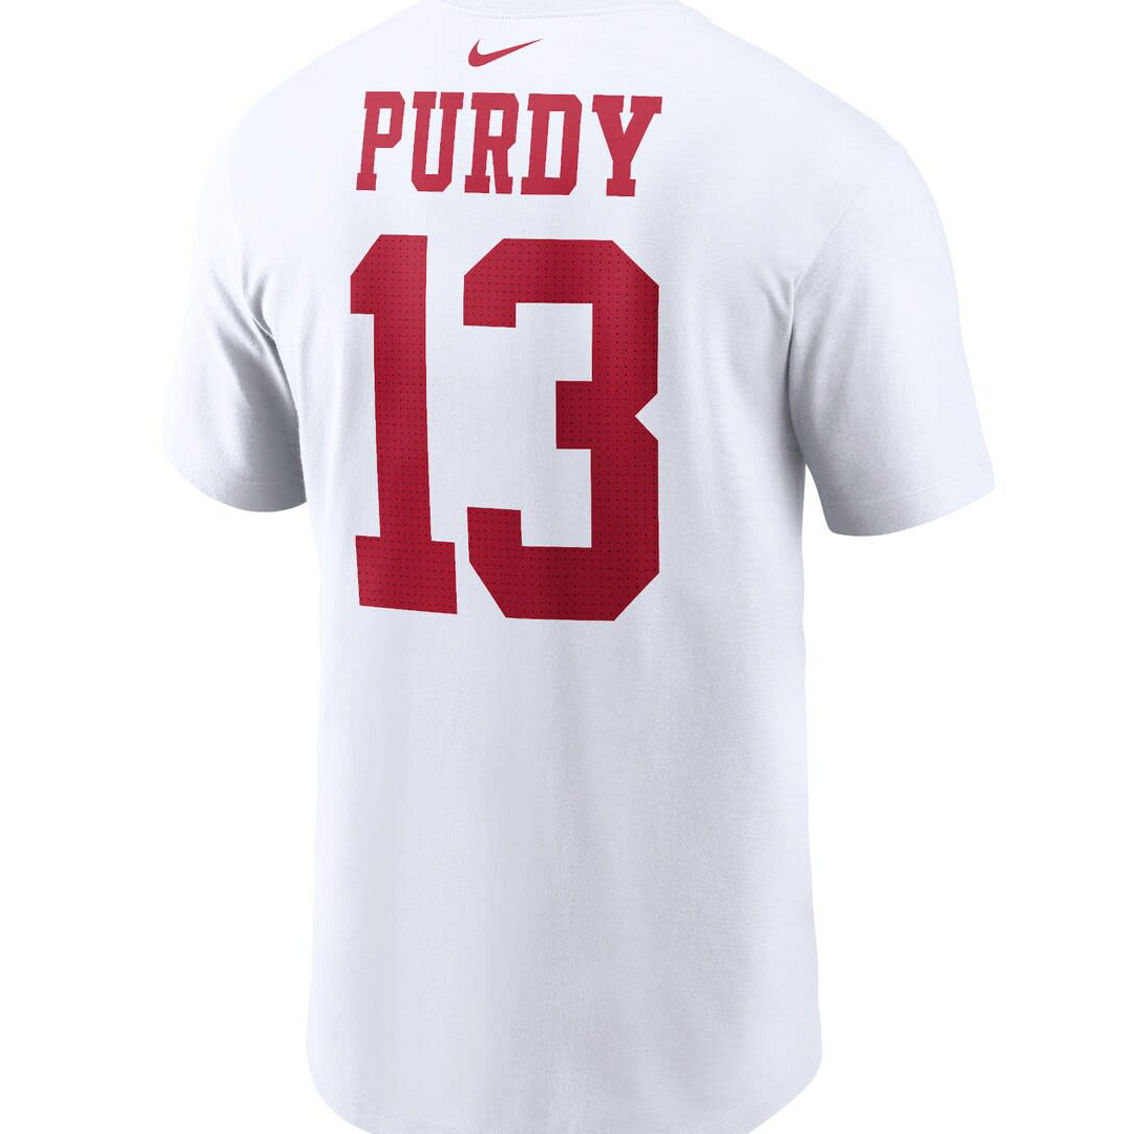 Nike Men's Brock Purdy White San Francisco 49ers Player Name & Number T-Shirt - Image 4 of 4